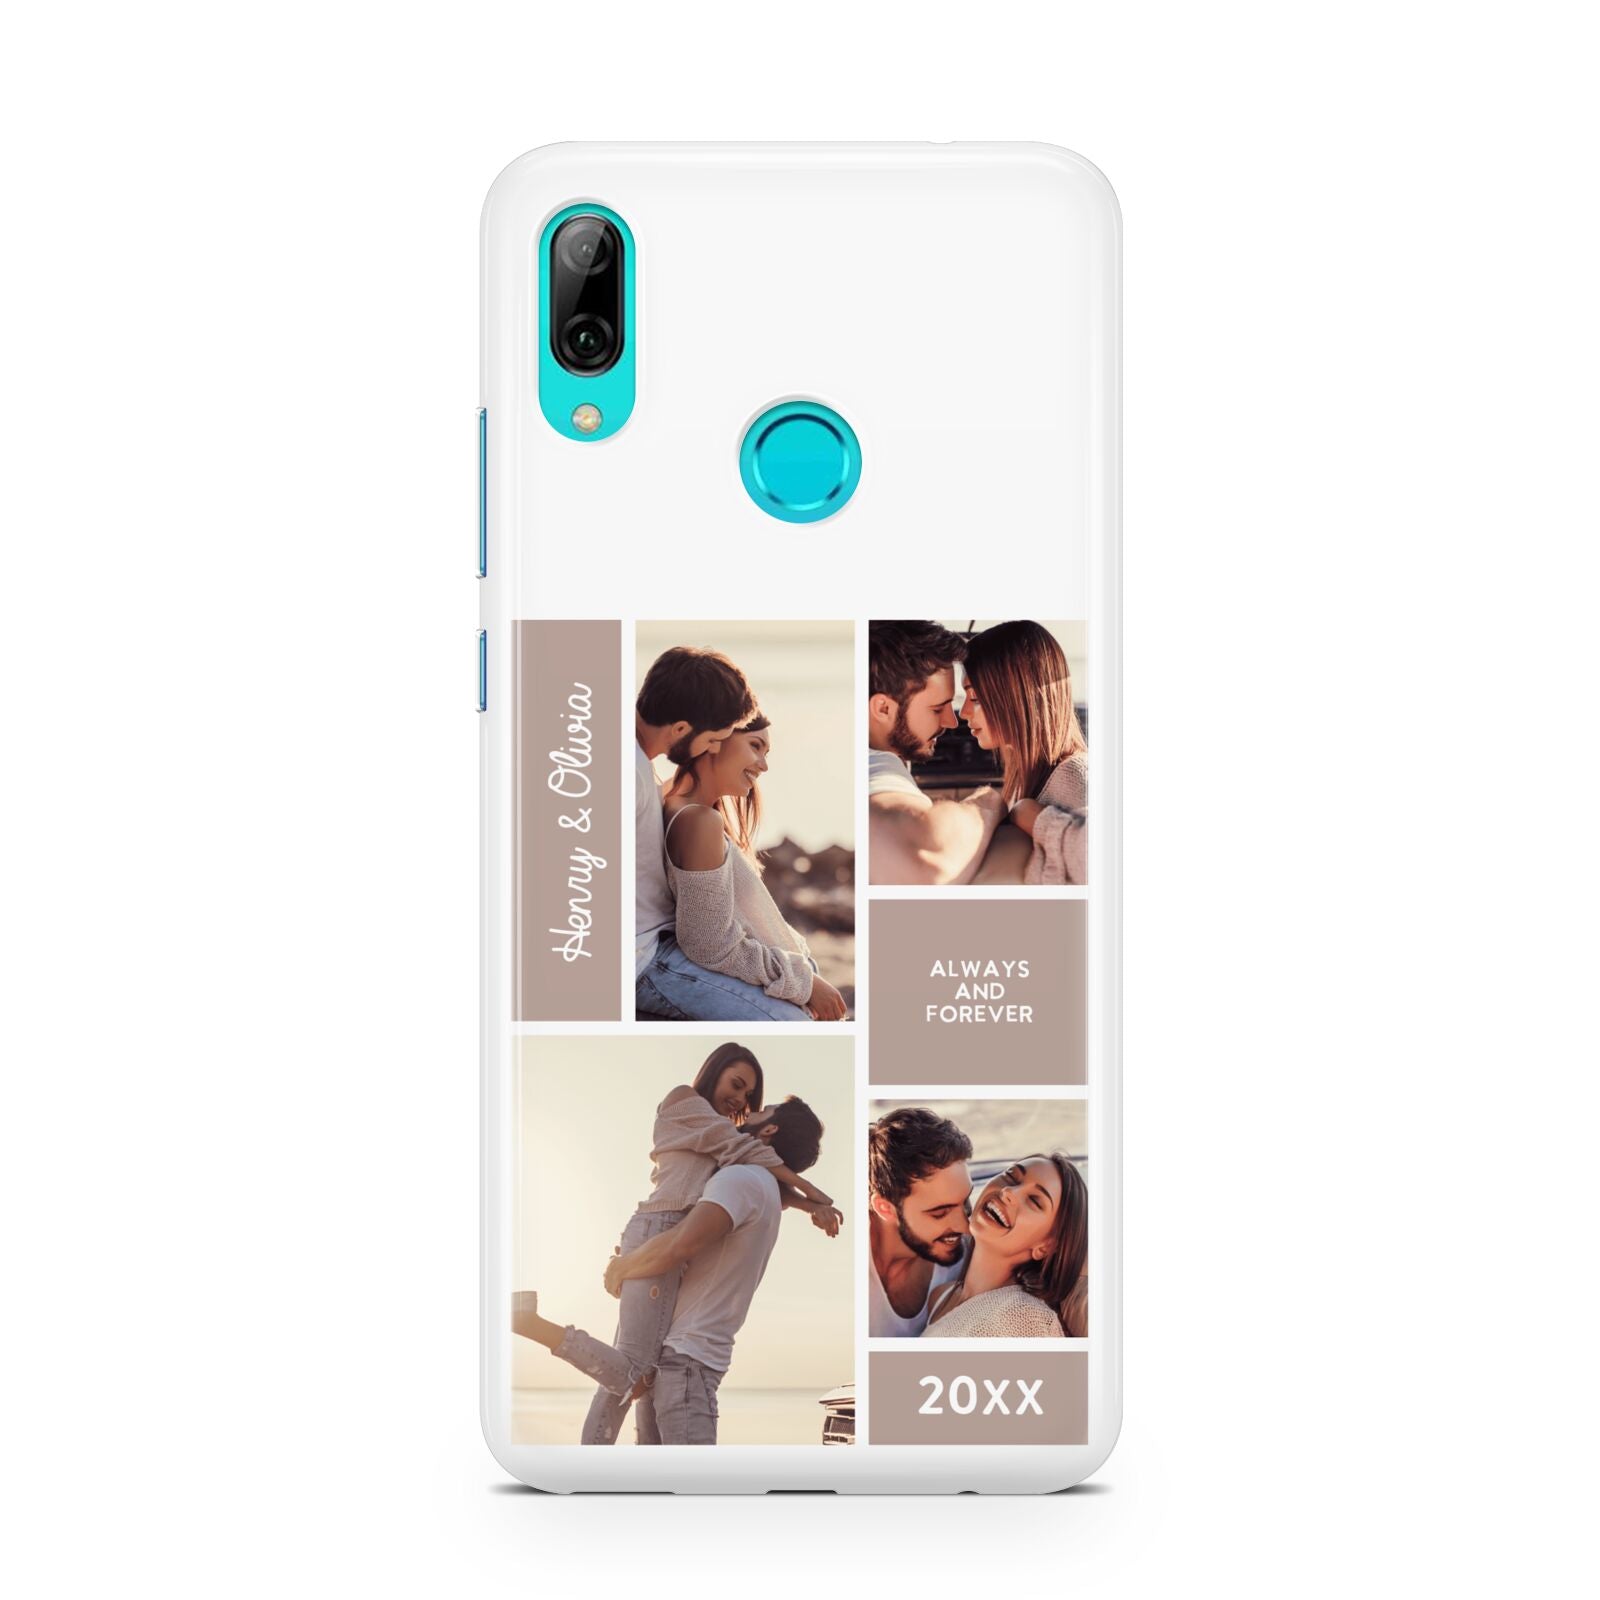 Couples Valentine Photo Collage Personalised Huawei P Smart 2019 Case